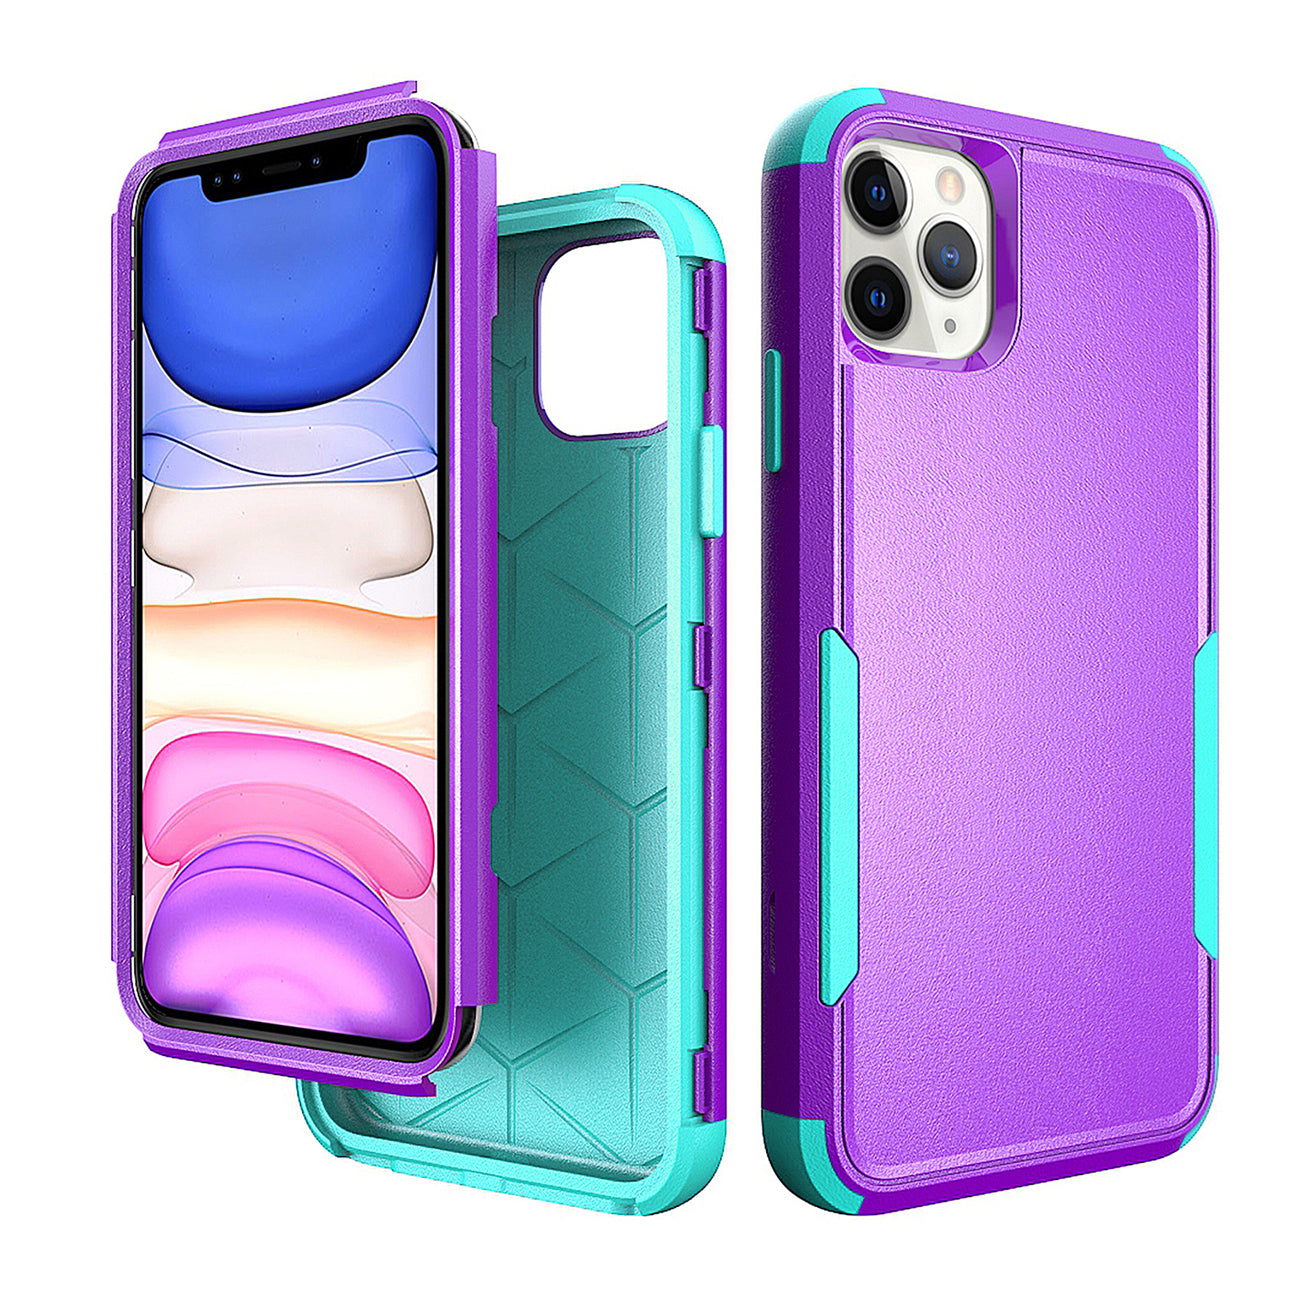 3in1 Hybrid Heavy Duty Defender Rugged Armor Case For APPLE IPHONE 11 PRO In Purple